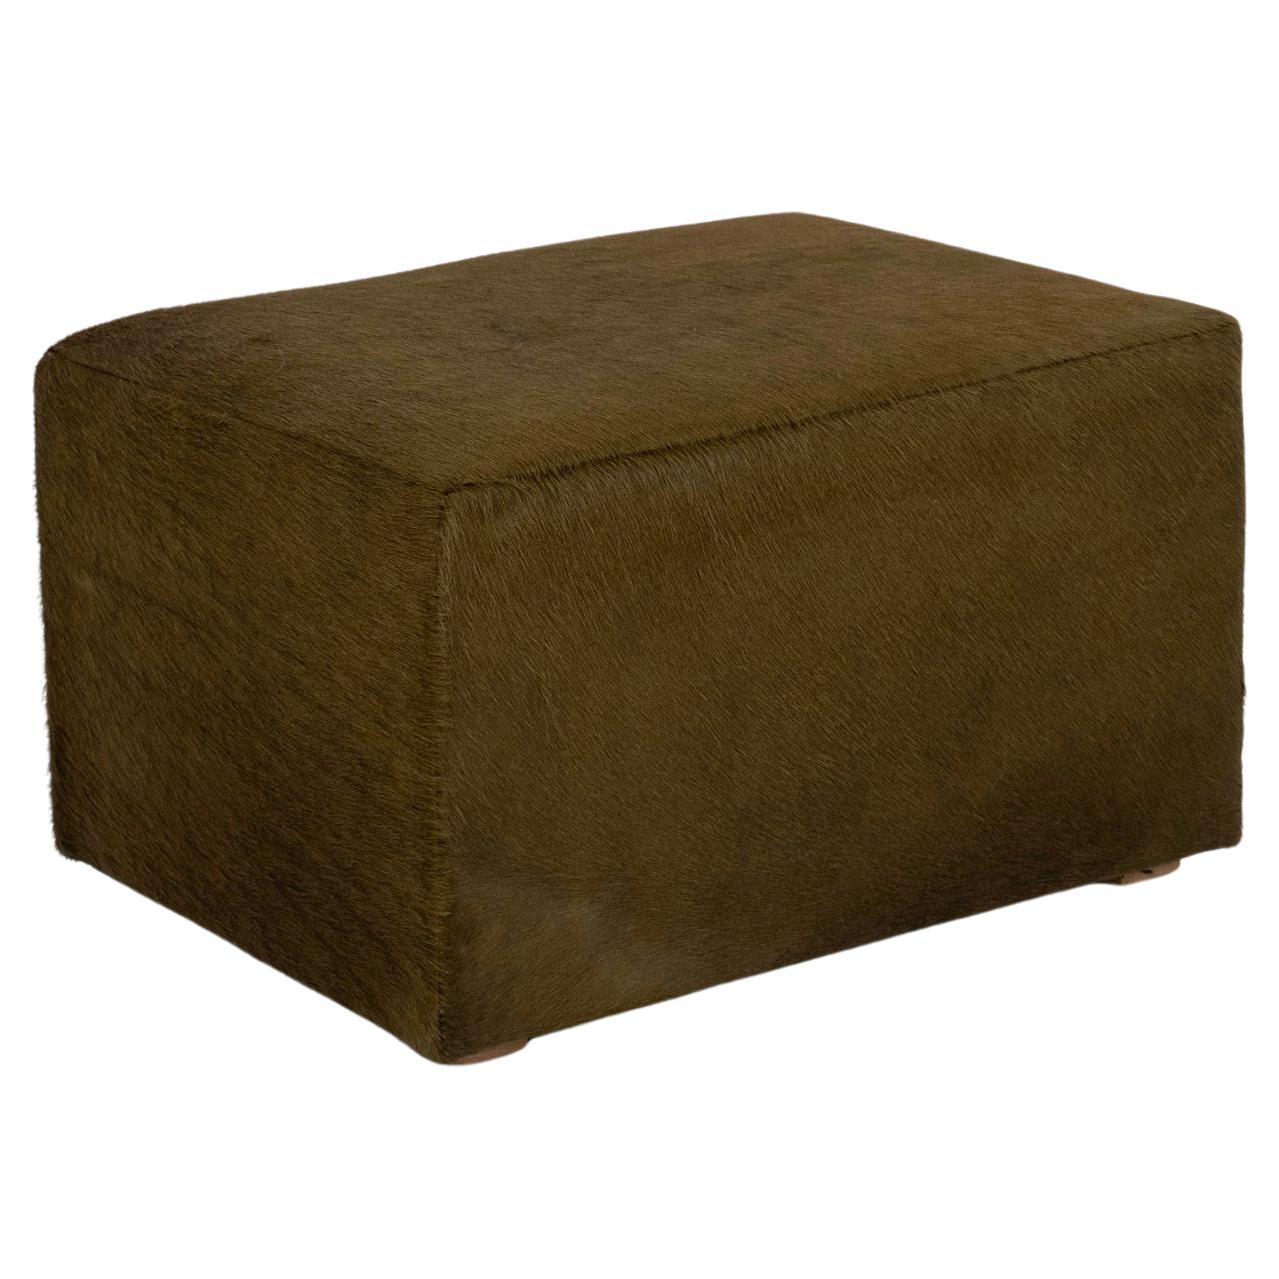 Cubist Verde Olive Green Hair Hide Ottoman With White Oak Feet For Sale